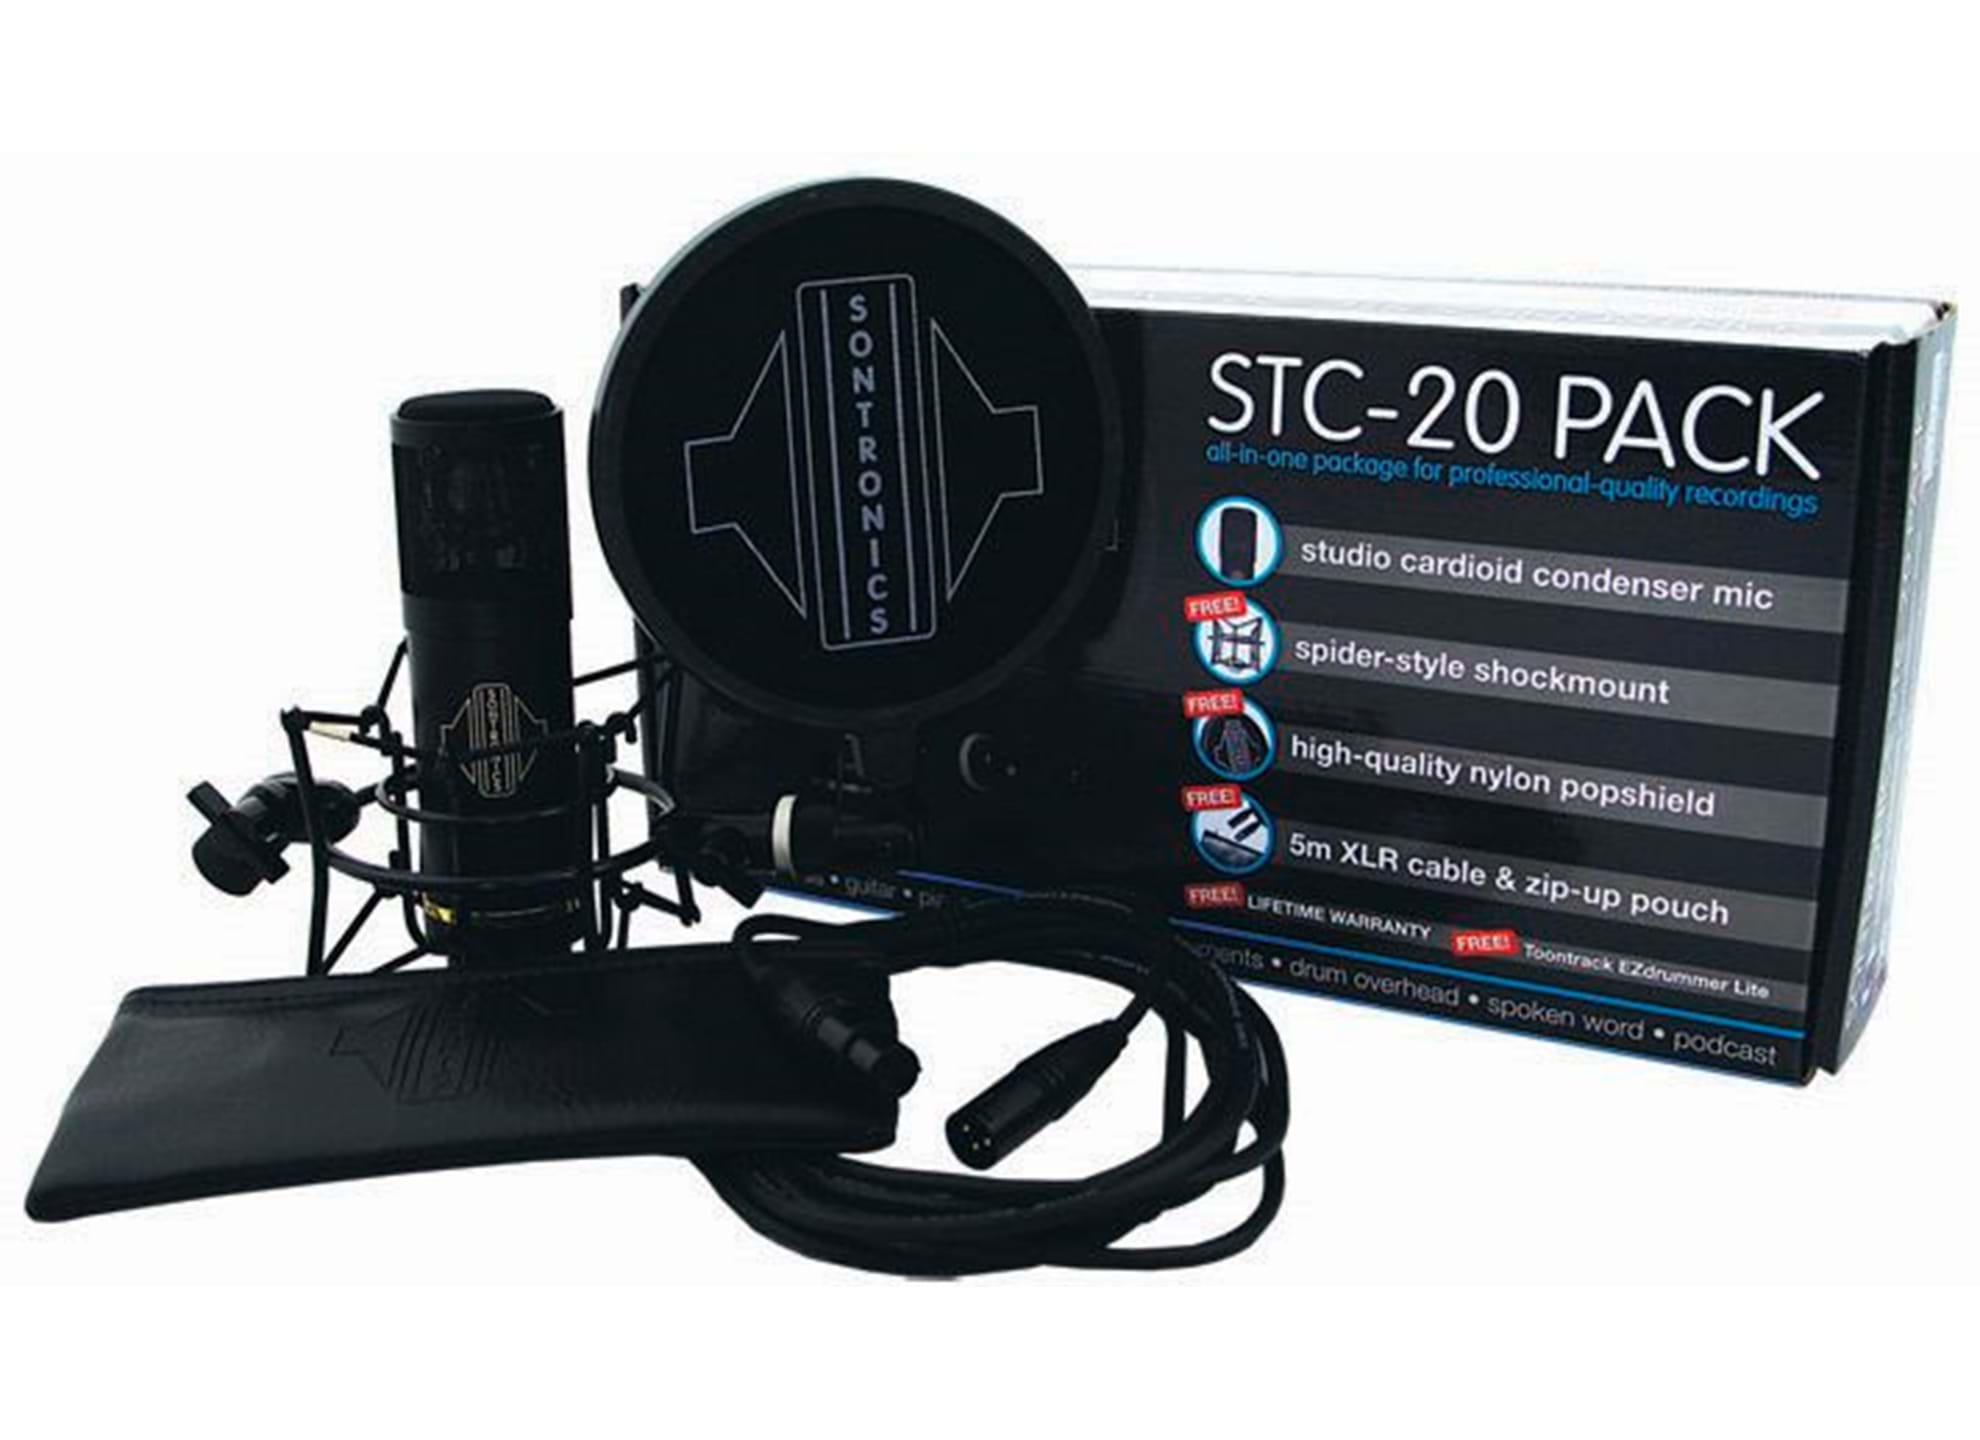 STC-20 Pack